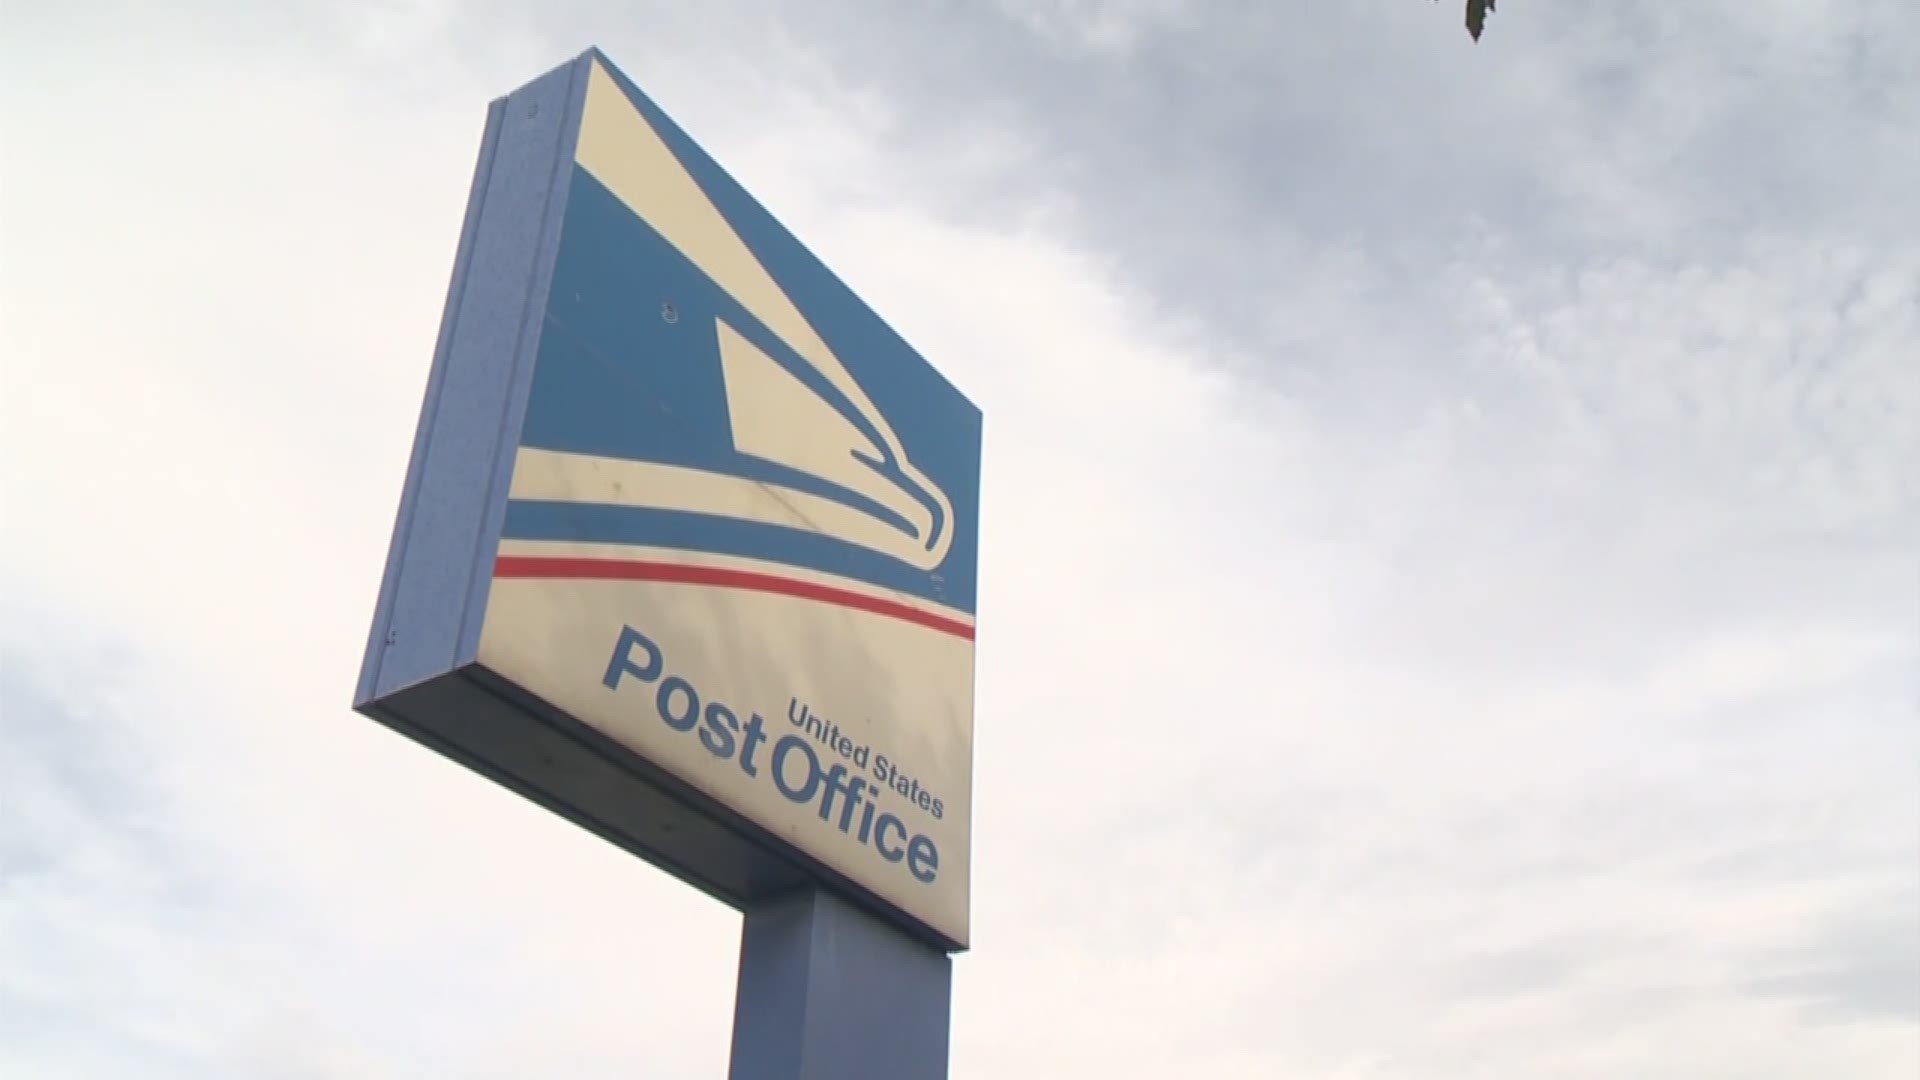 A USPS employee is on "non-duty" status after an investigation into the US postal service following several reports of stolen mail.